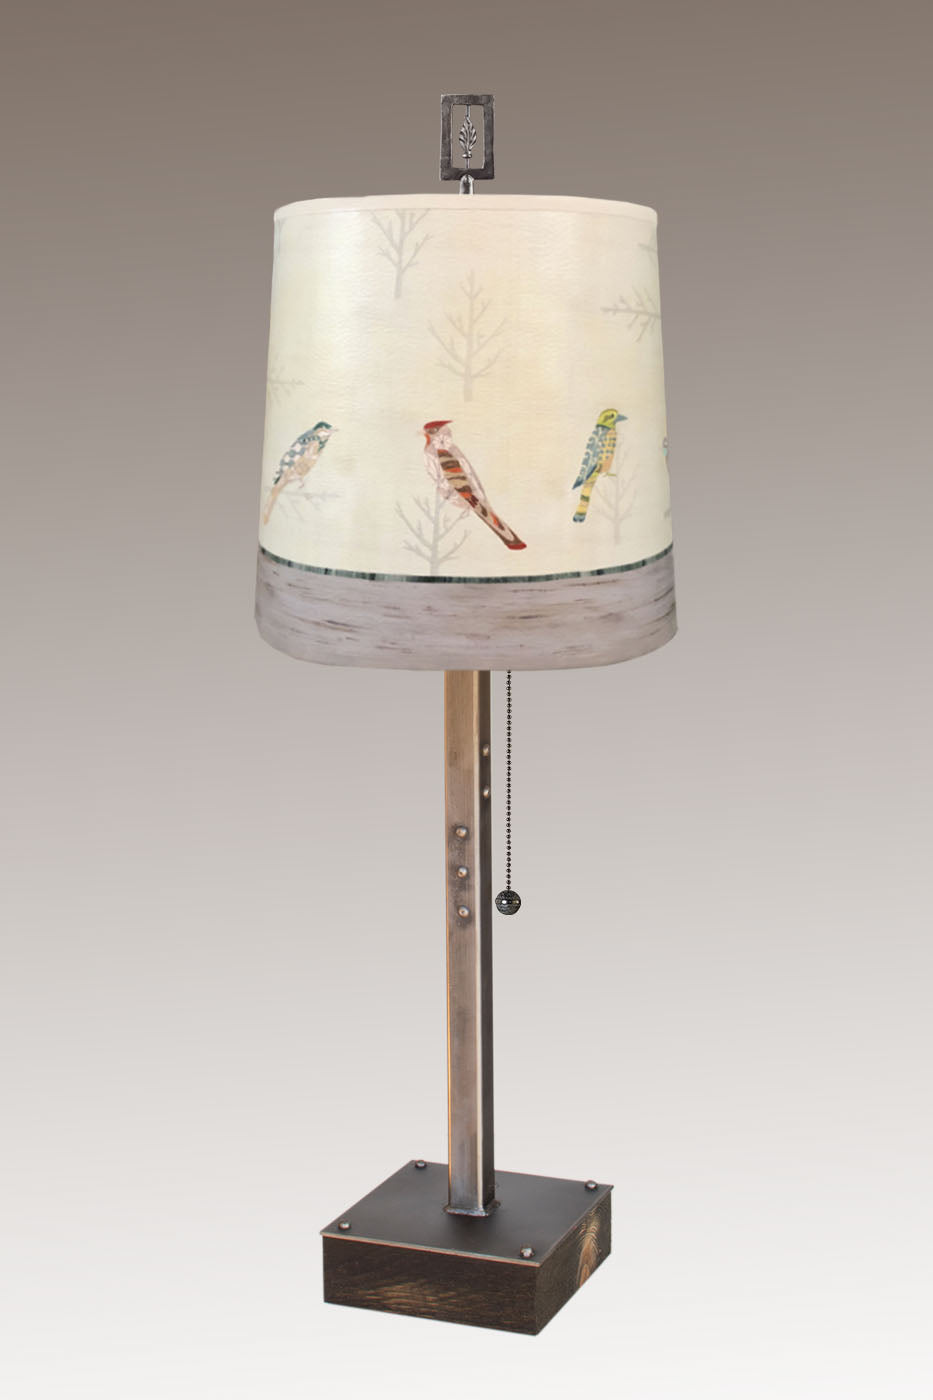 Janna Ugone &amp; Co Table Lamps Steel Table Lamp on Wood with Medium Drum Shade in Bird Friends